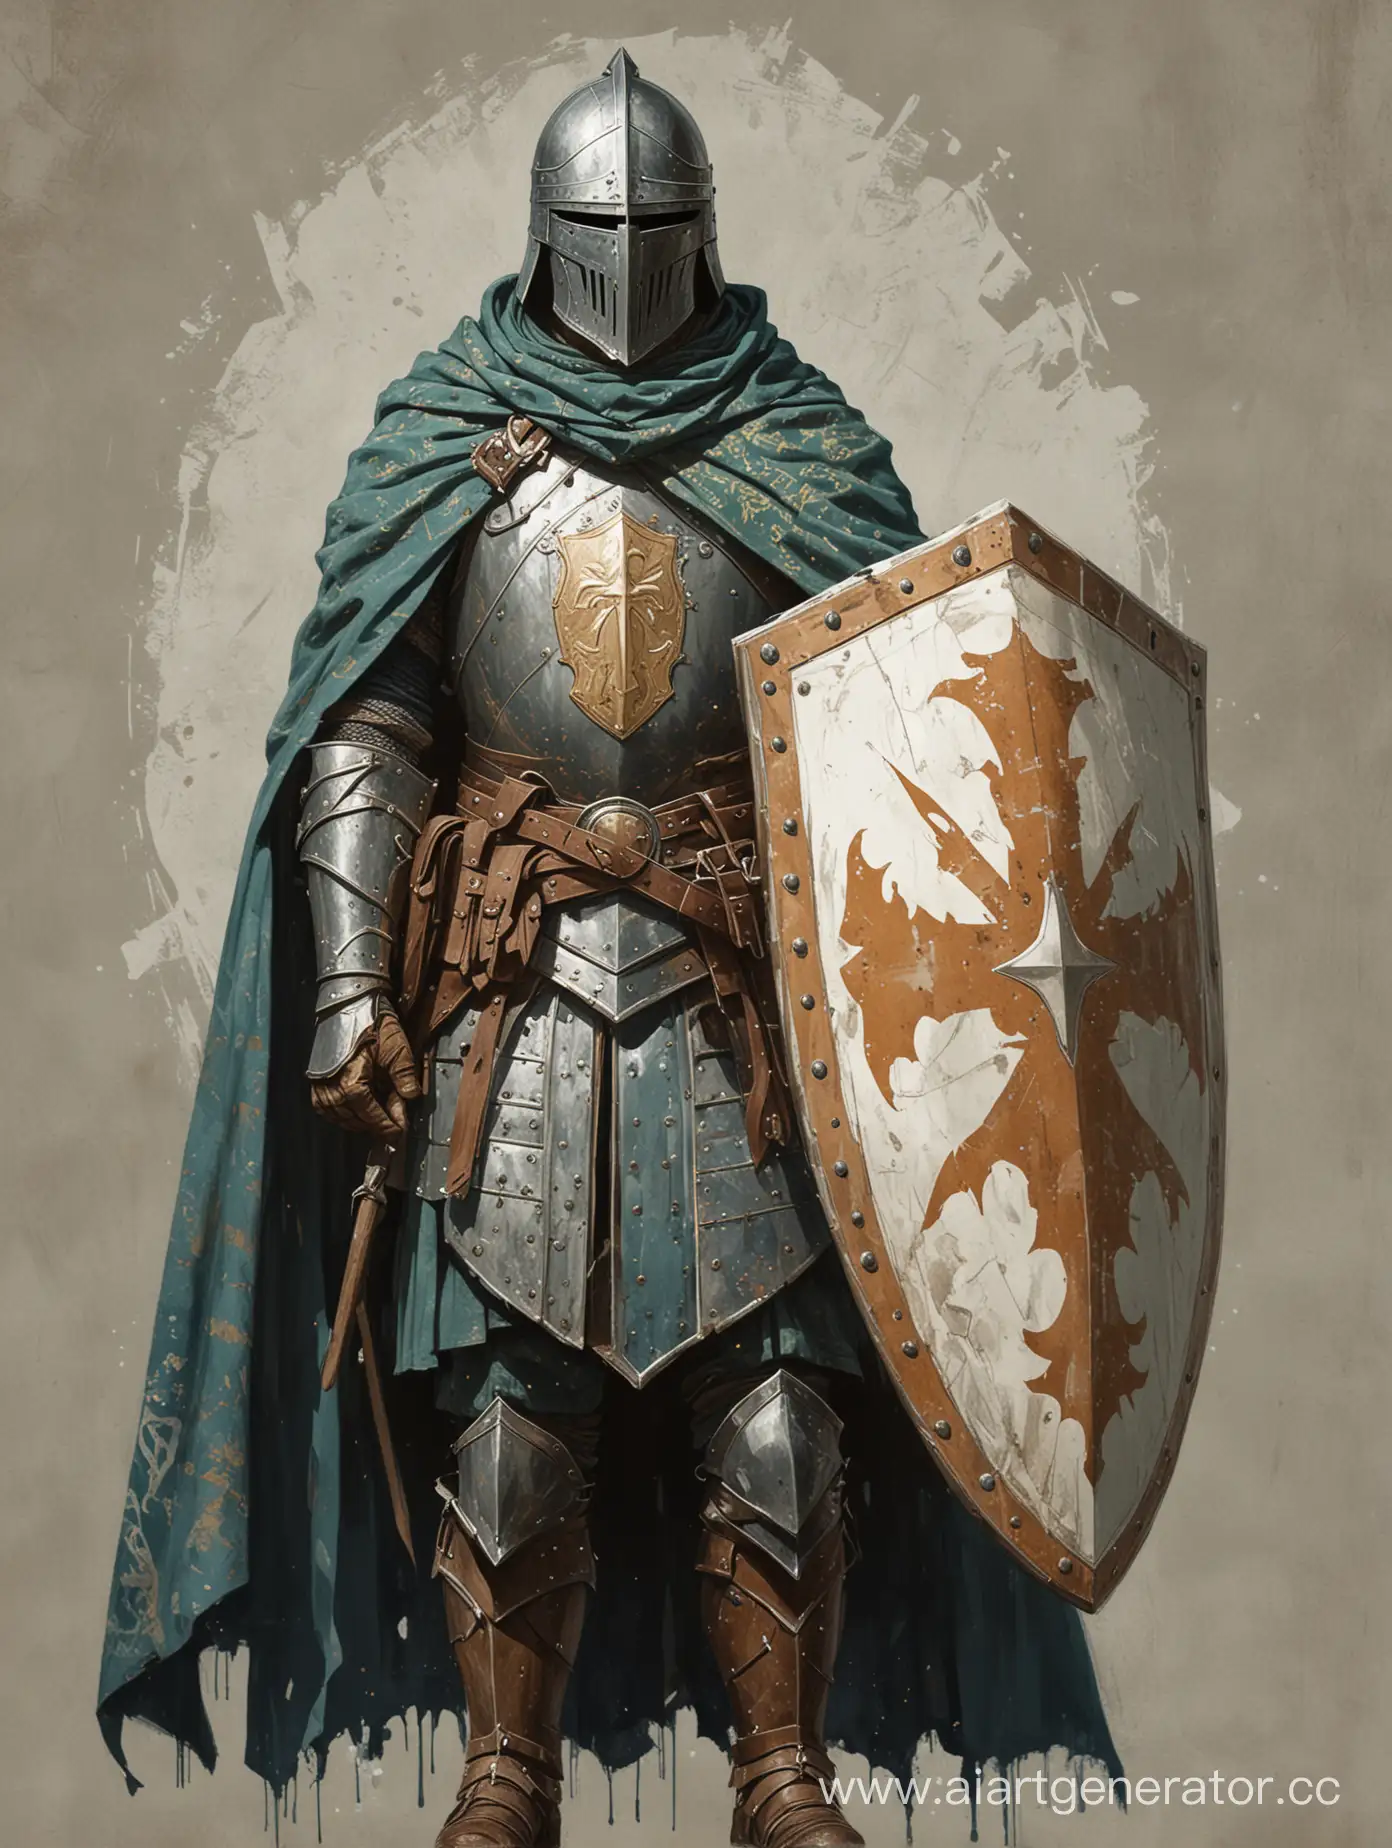 drawing of a knight with shield and cloak, in the style of adventure pulp, dark white and bronze, mottled, yup'ik art, heavy use of palette knives, light indigo and green, 1970